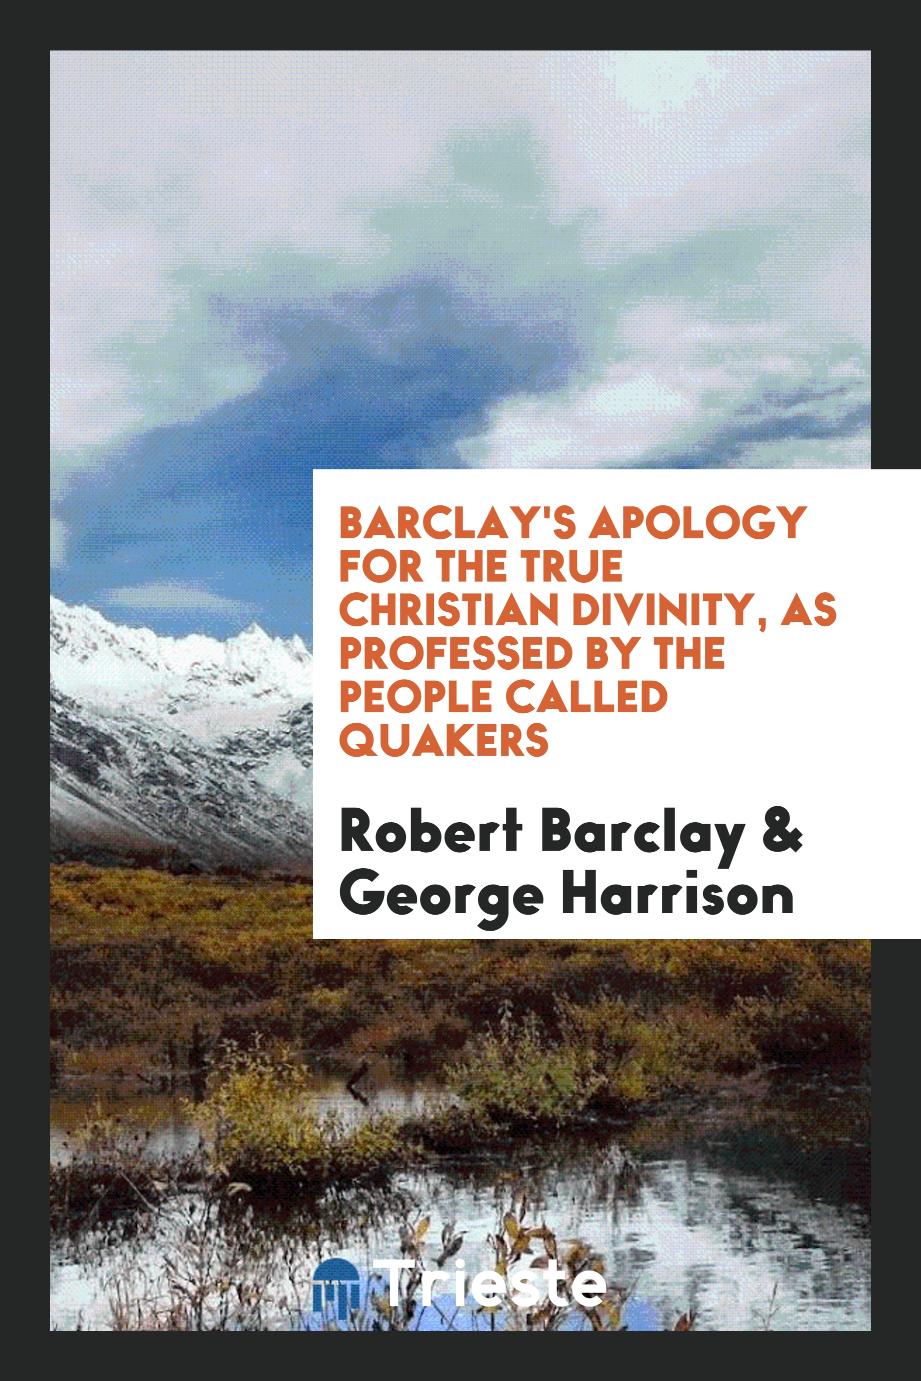 Barclay's Apology for the True Christian Divinity, as Professed by the People Called Quakers